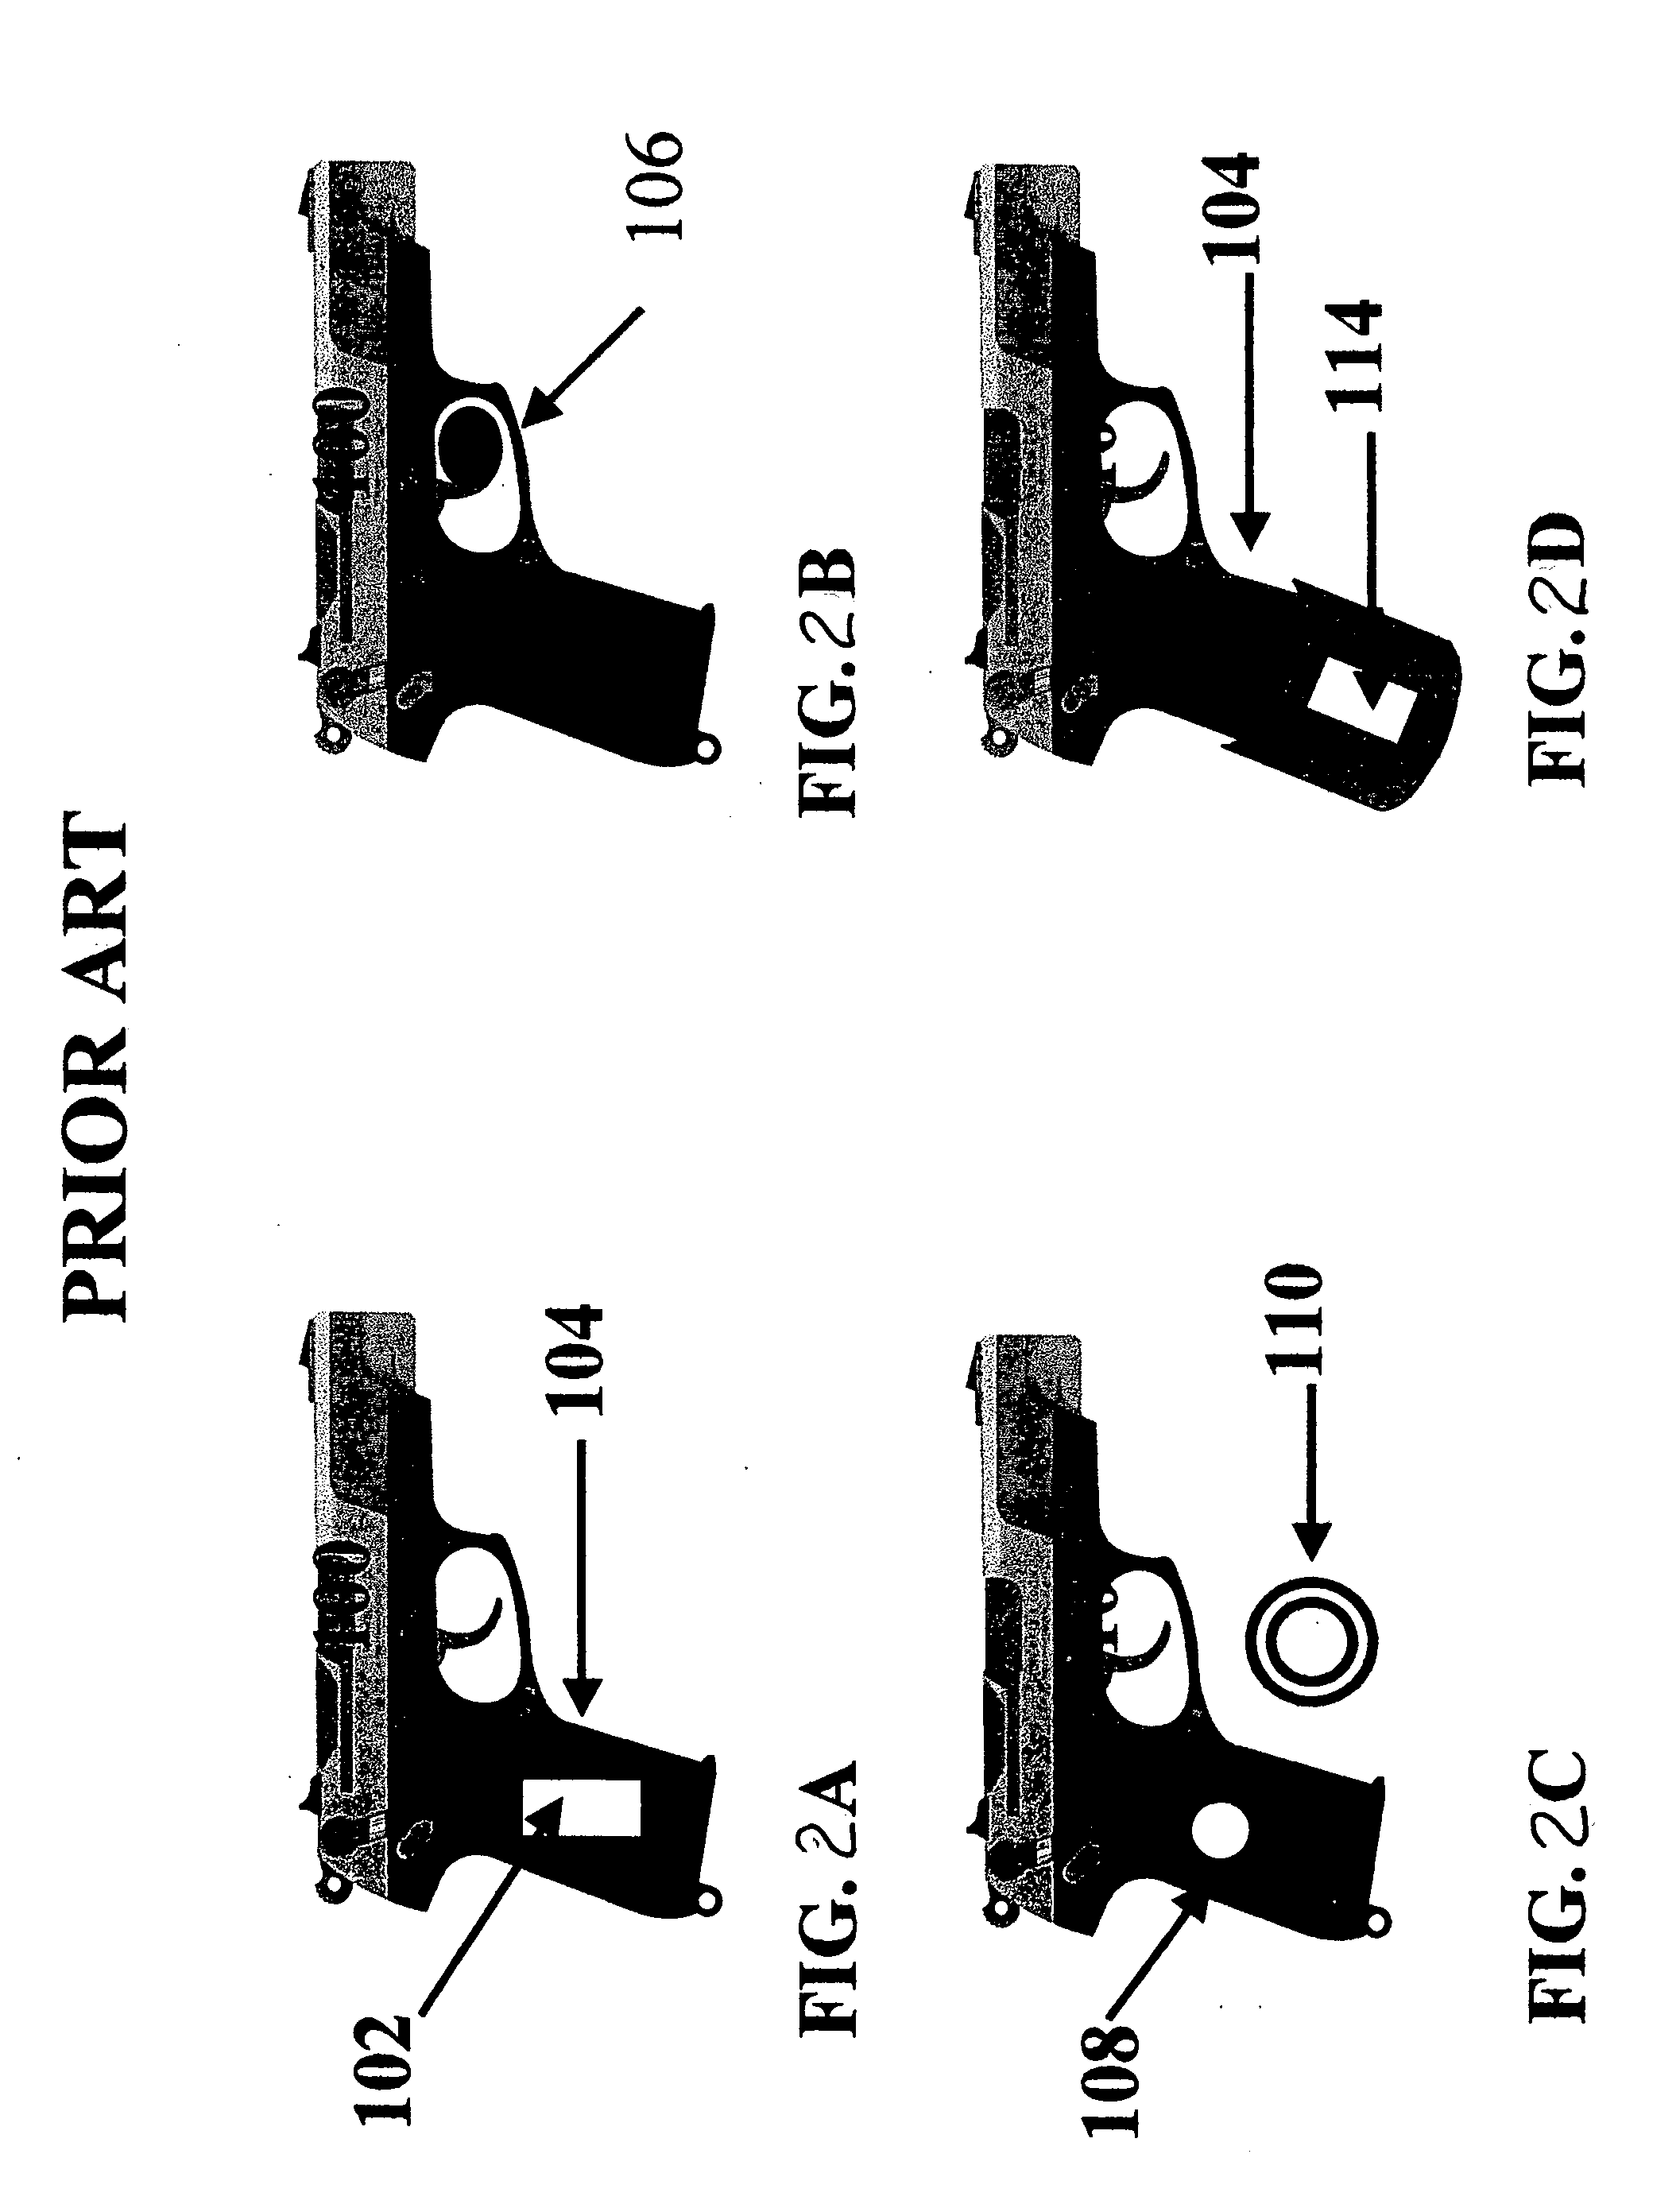 Apparatus and method for user control of appliances